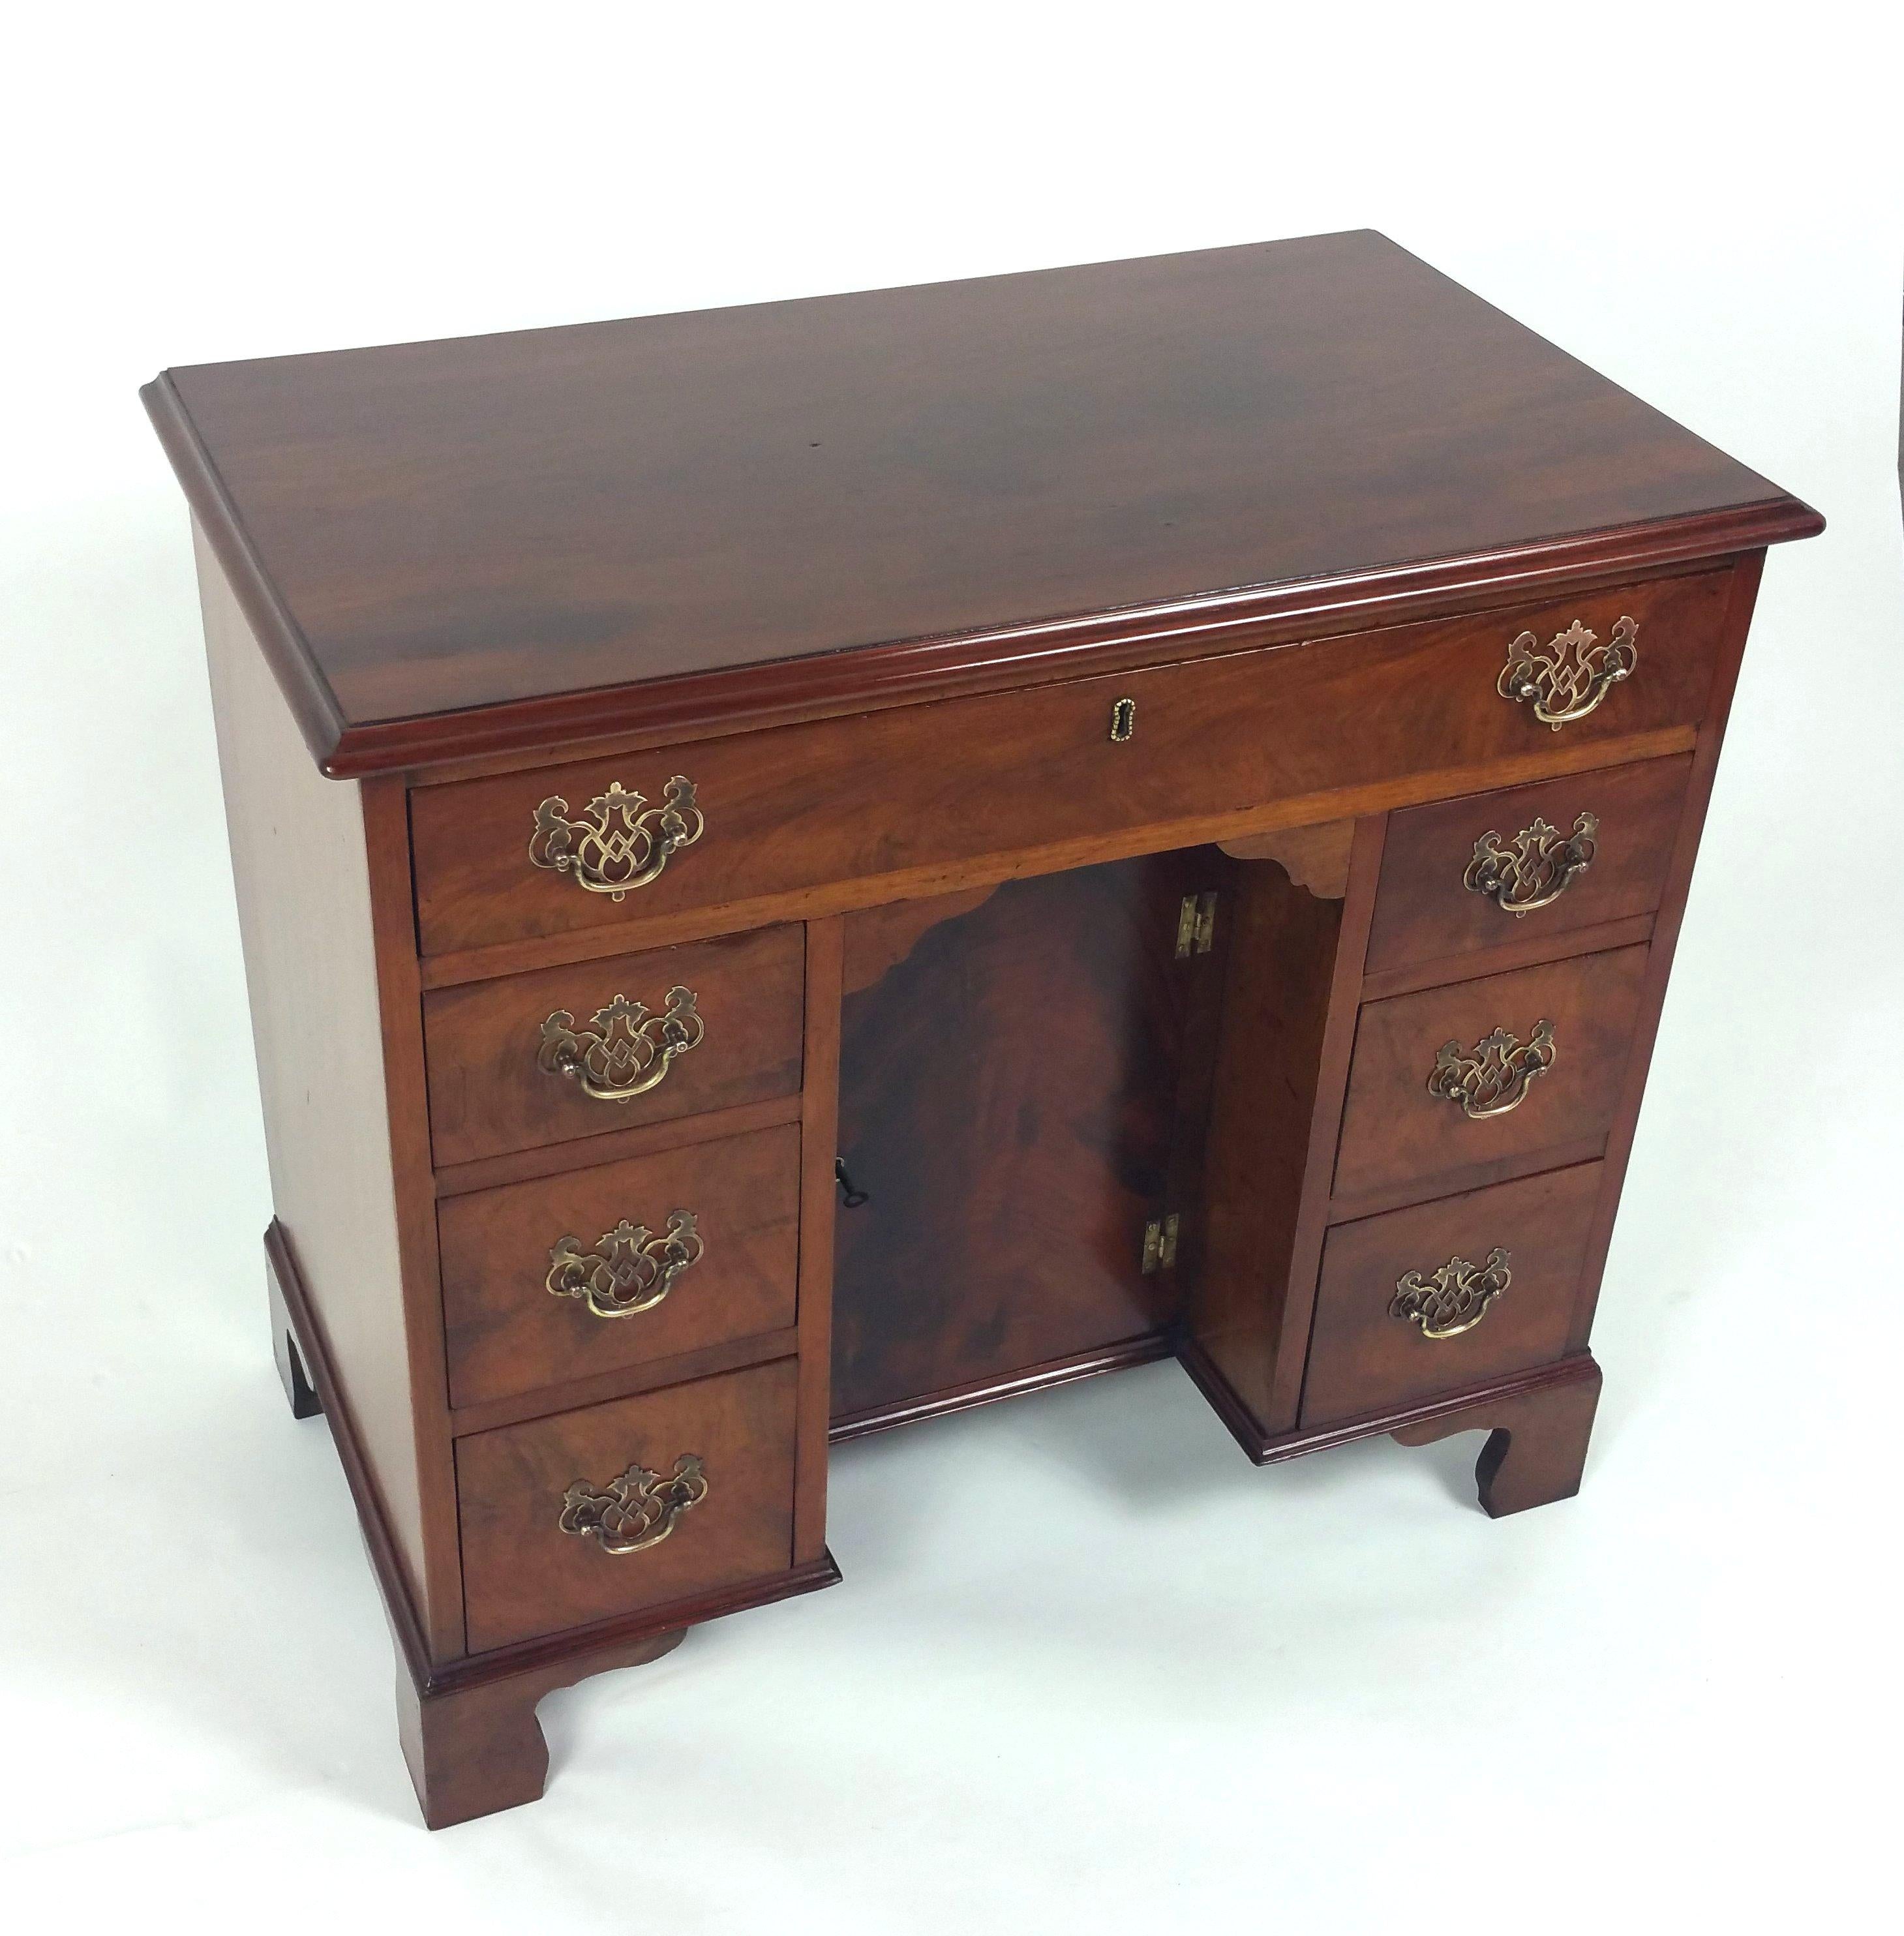 This attractive and well-proportioned George III mahogany knee hole desk features one long drawer over 6 smaller drawers and a central cupboard with lock and key. The desk stands on bracket feet and has the original and ornate pierced brass handles.